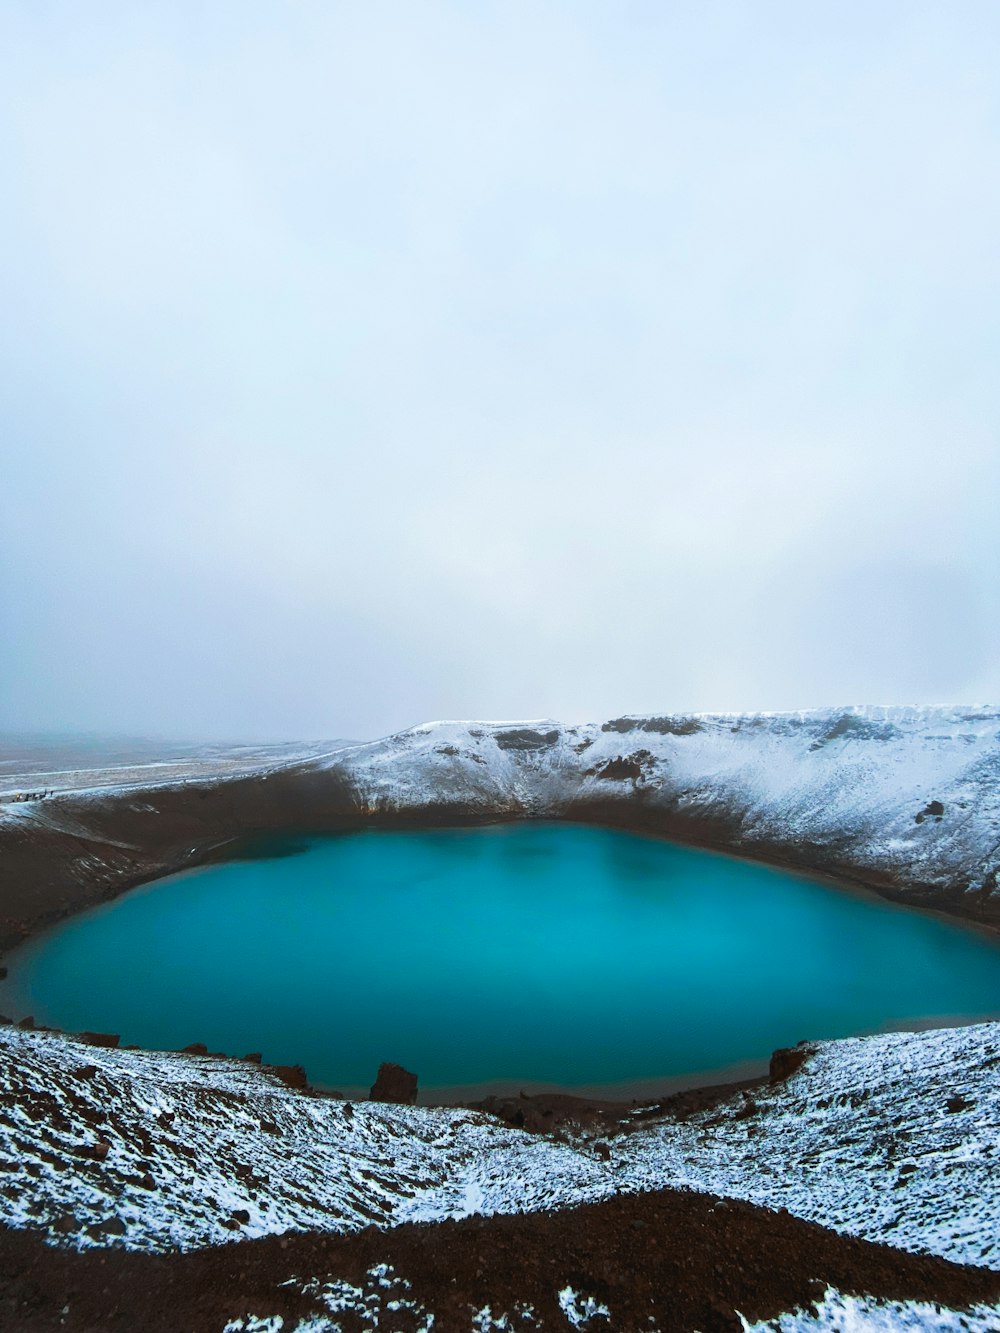 a blue lake surrounded by snow covered hills